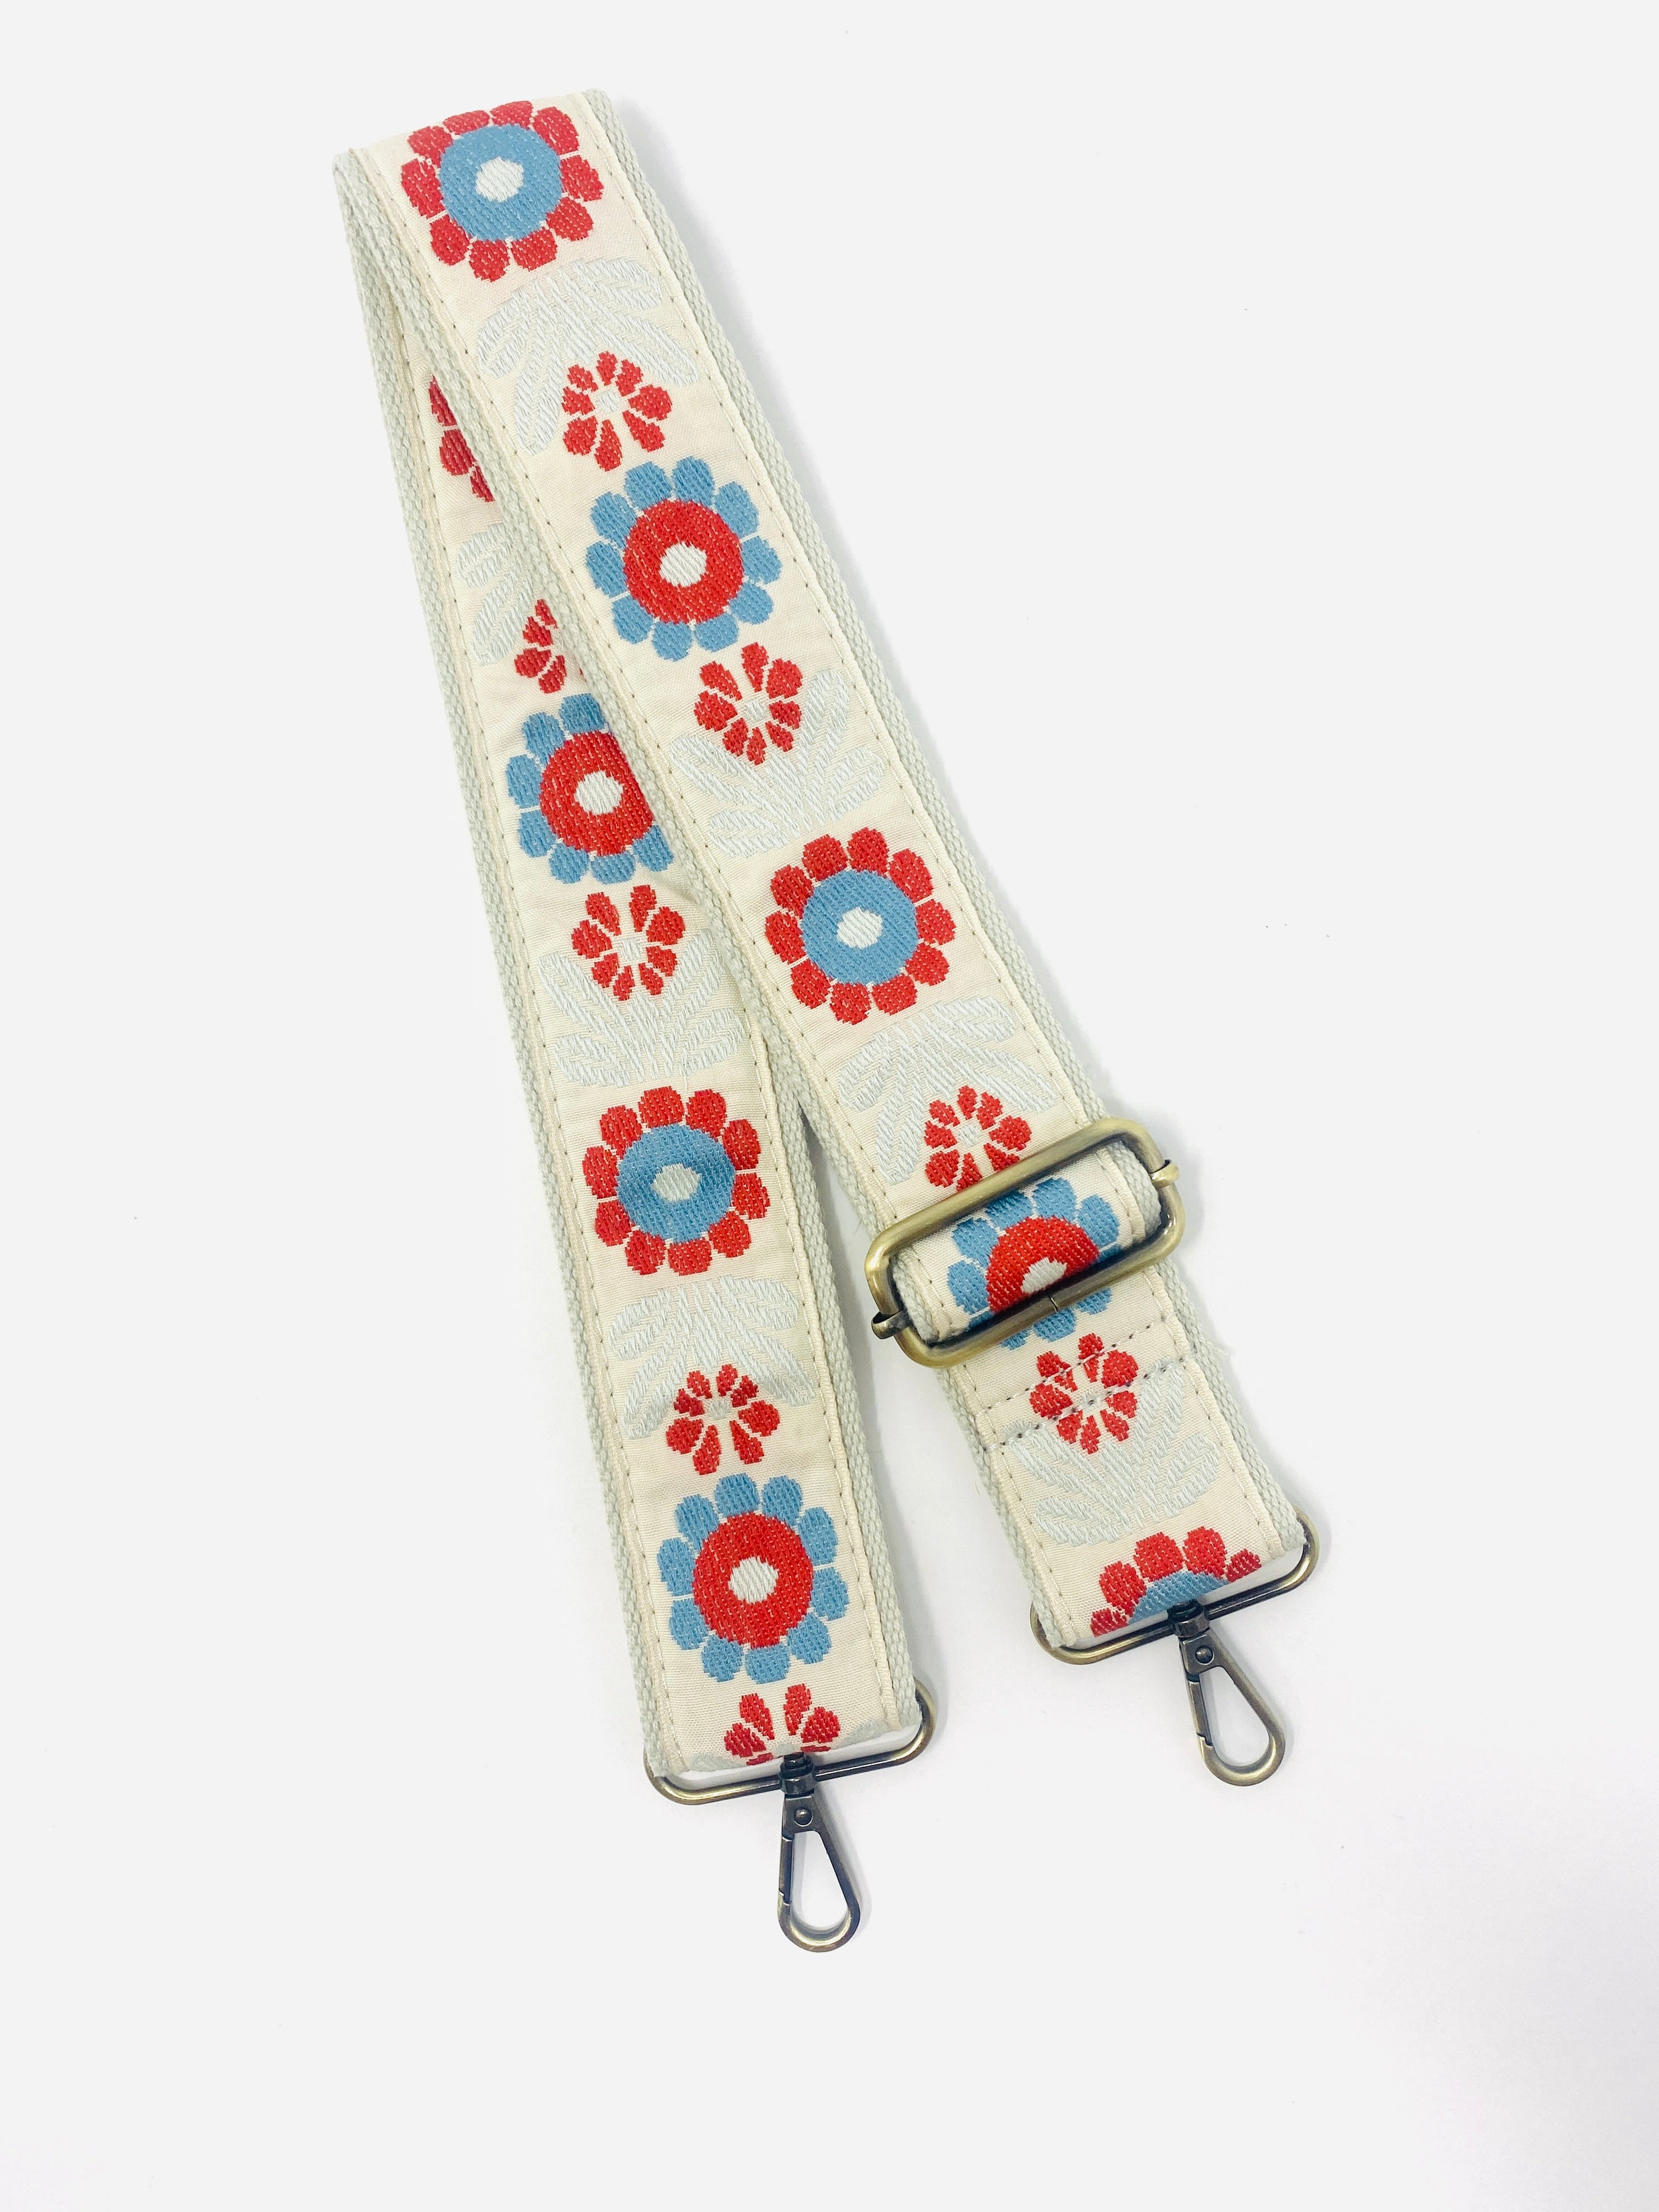 Simply 70's Embroidered Guitar Strap